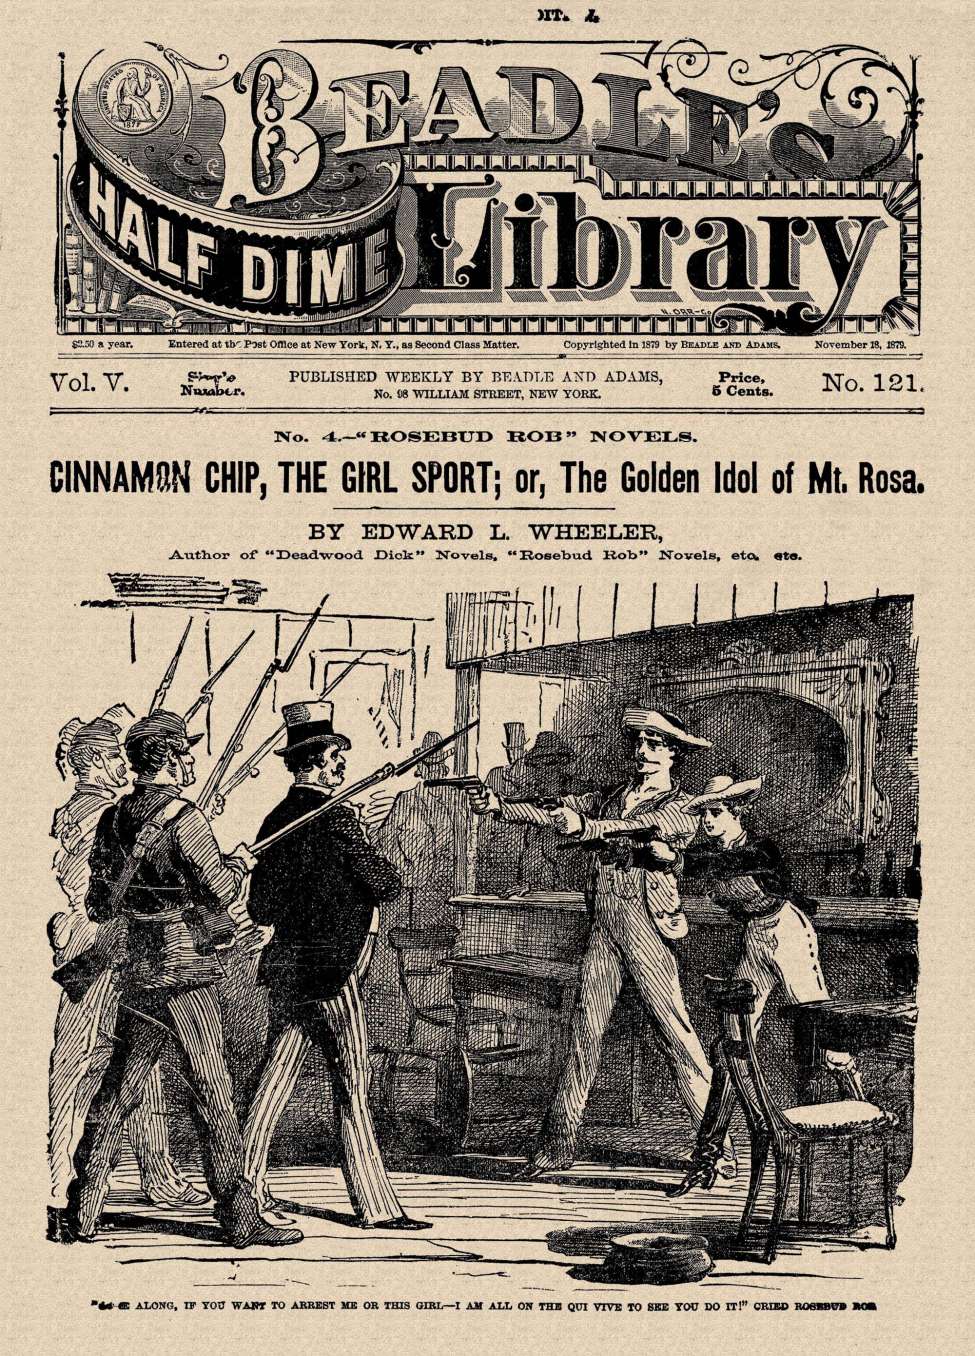 Comic Book Cover For Beadle's Half Dime Library 121 - Cinnamon Chip, the Girl Sport